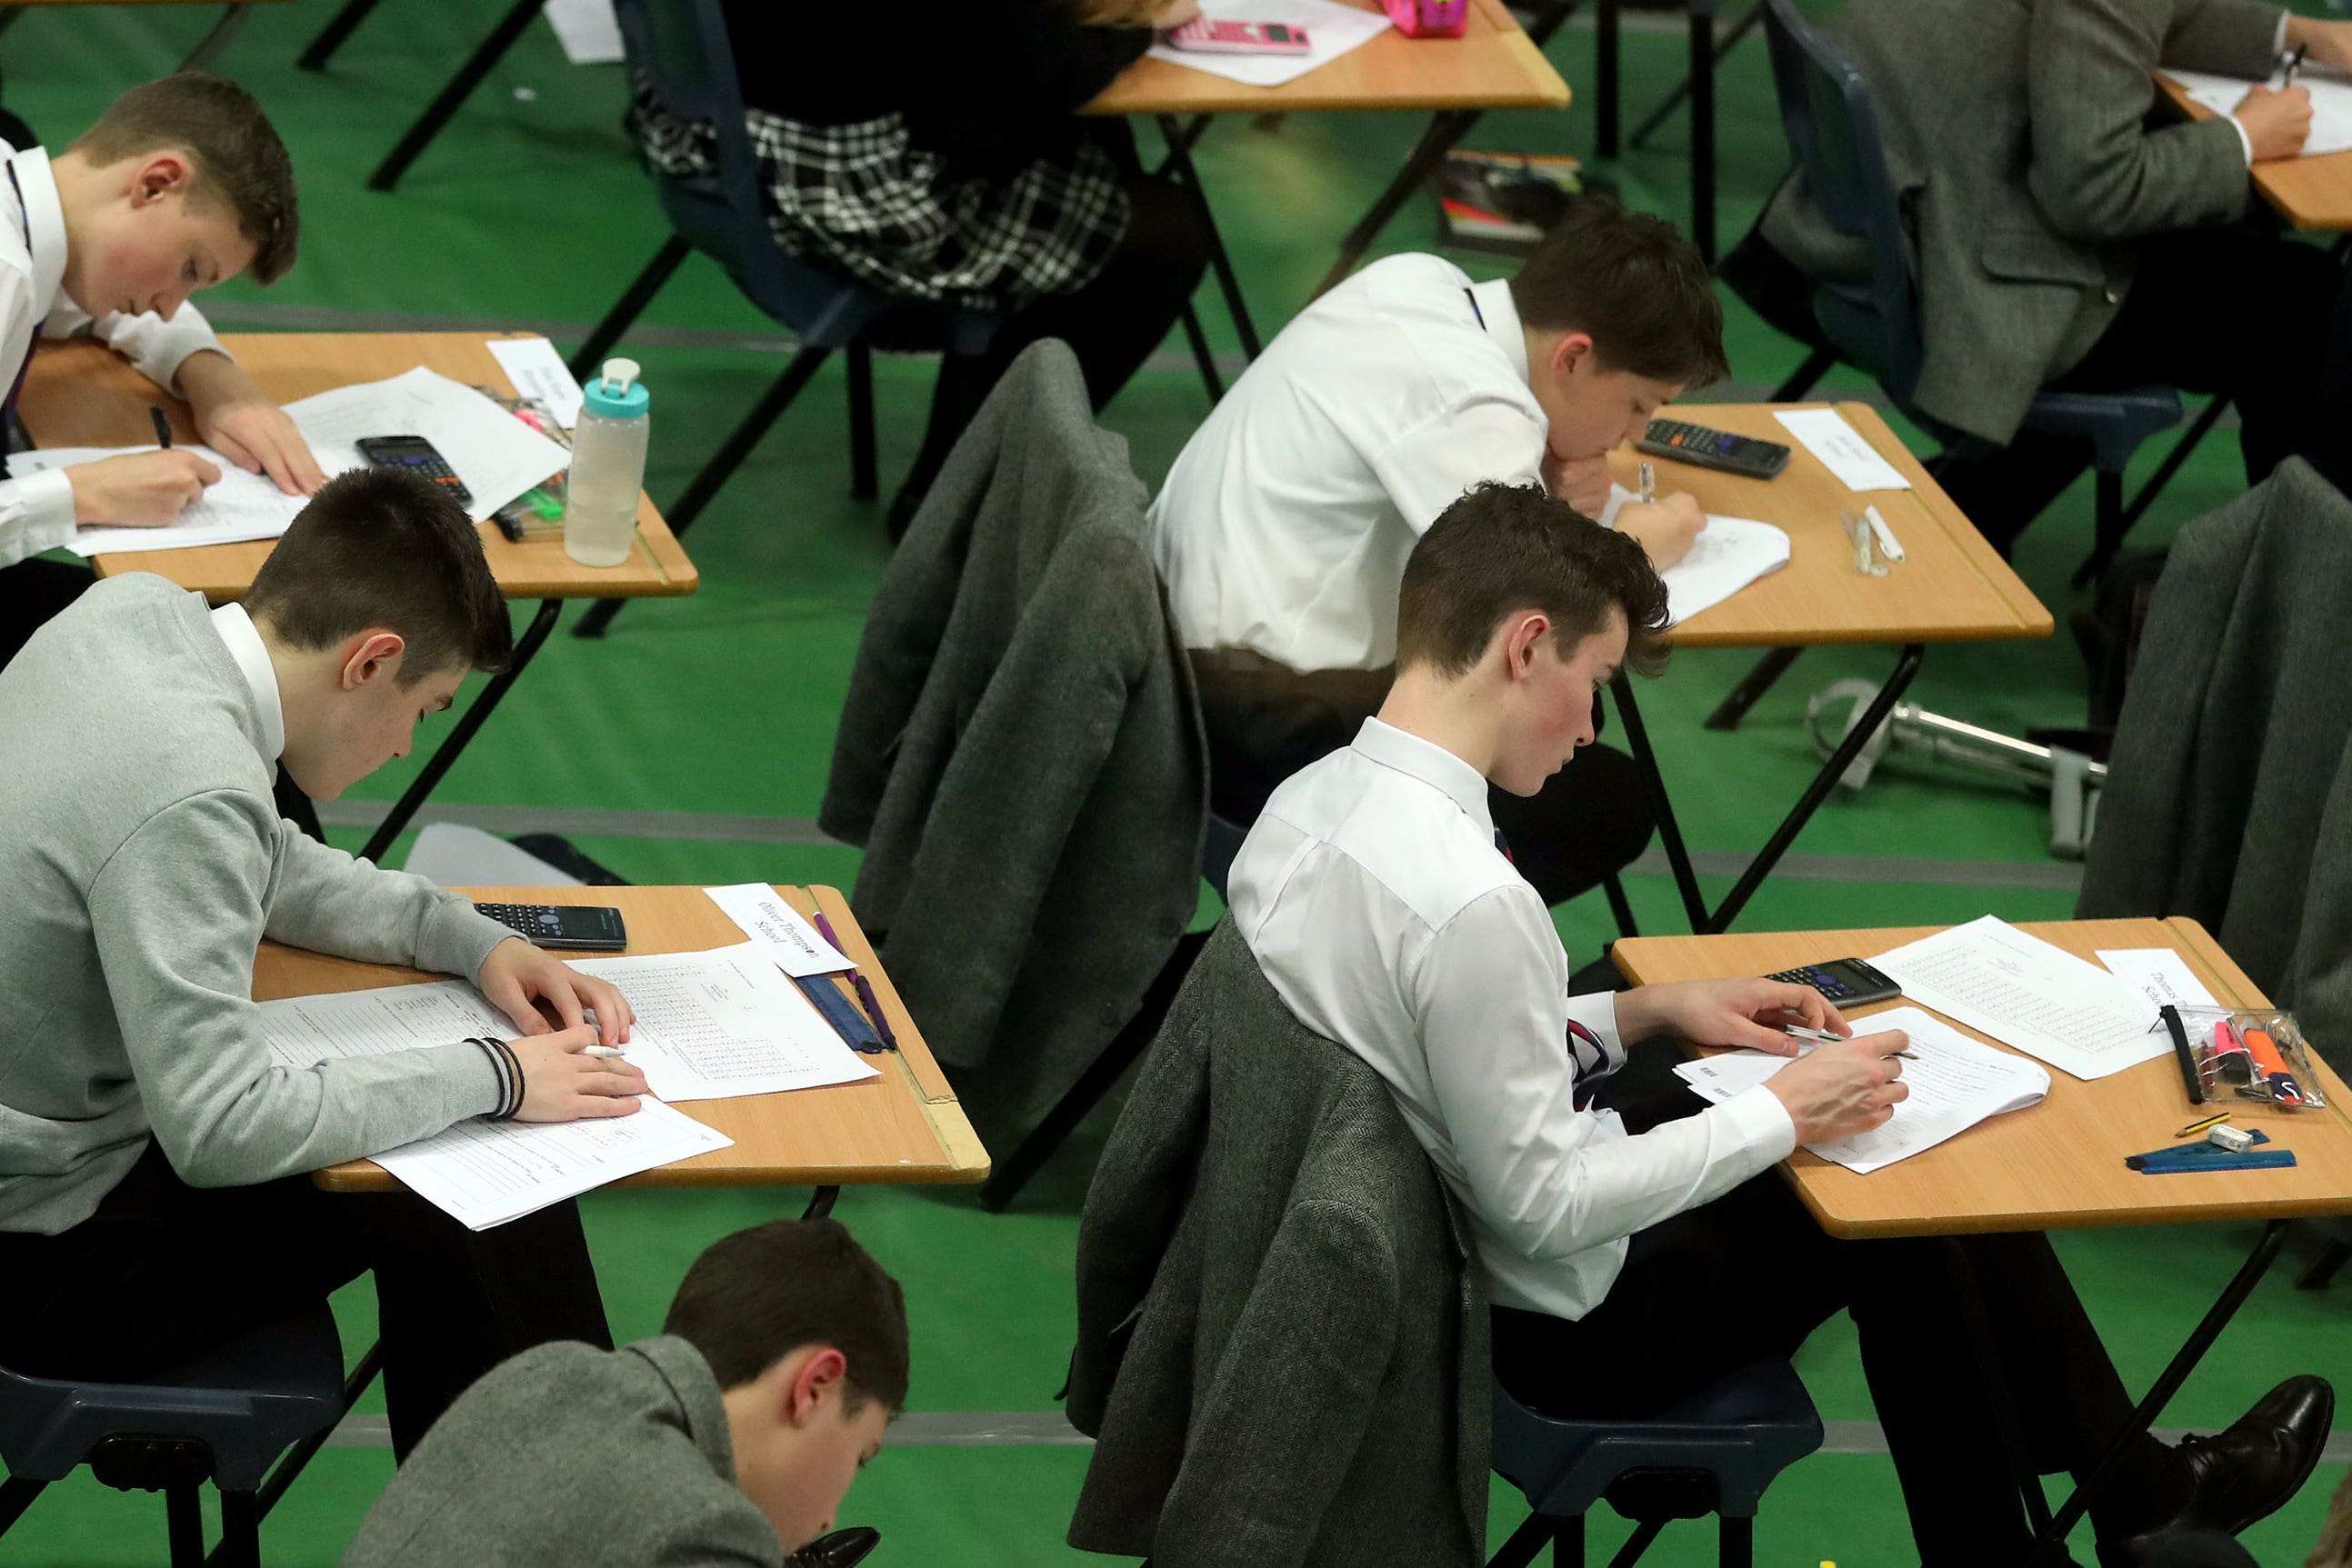 Written exams should continue to be the main method for assessing students’ knowledge and understanding, a report says (PA)